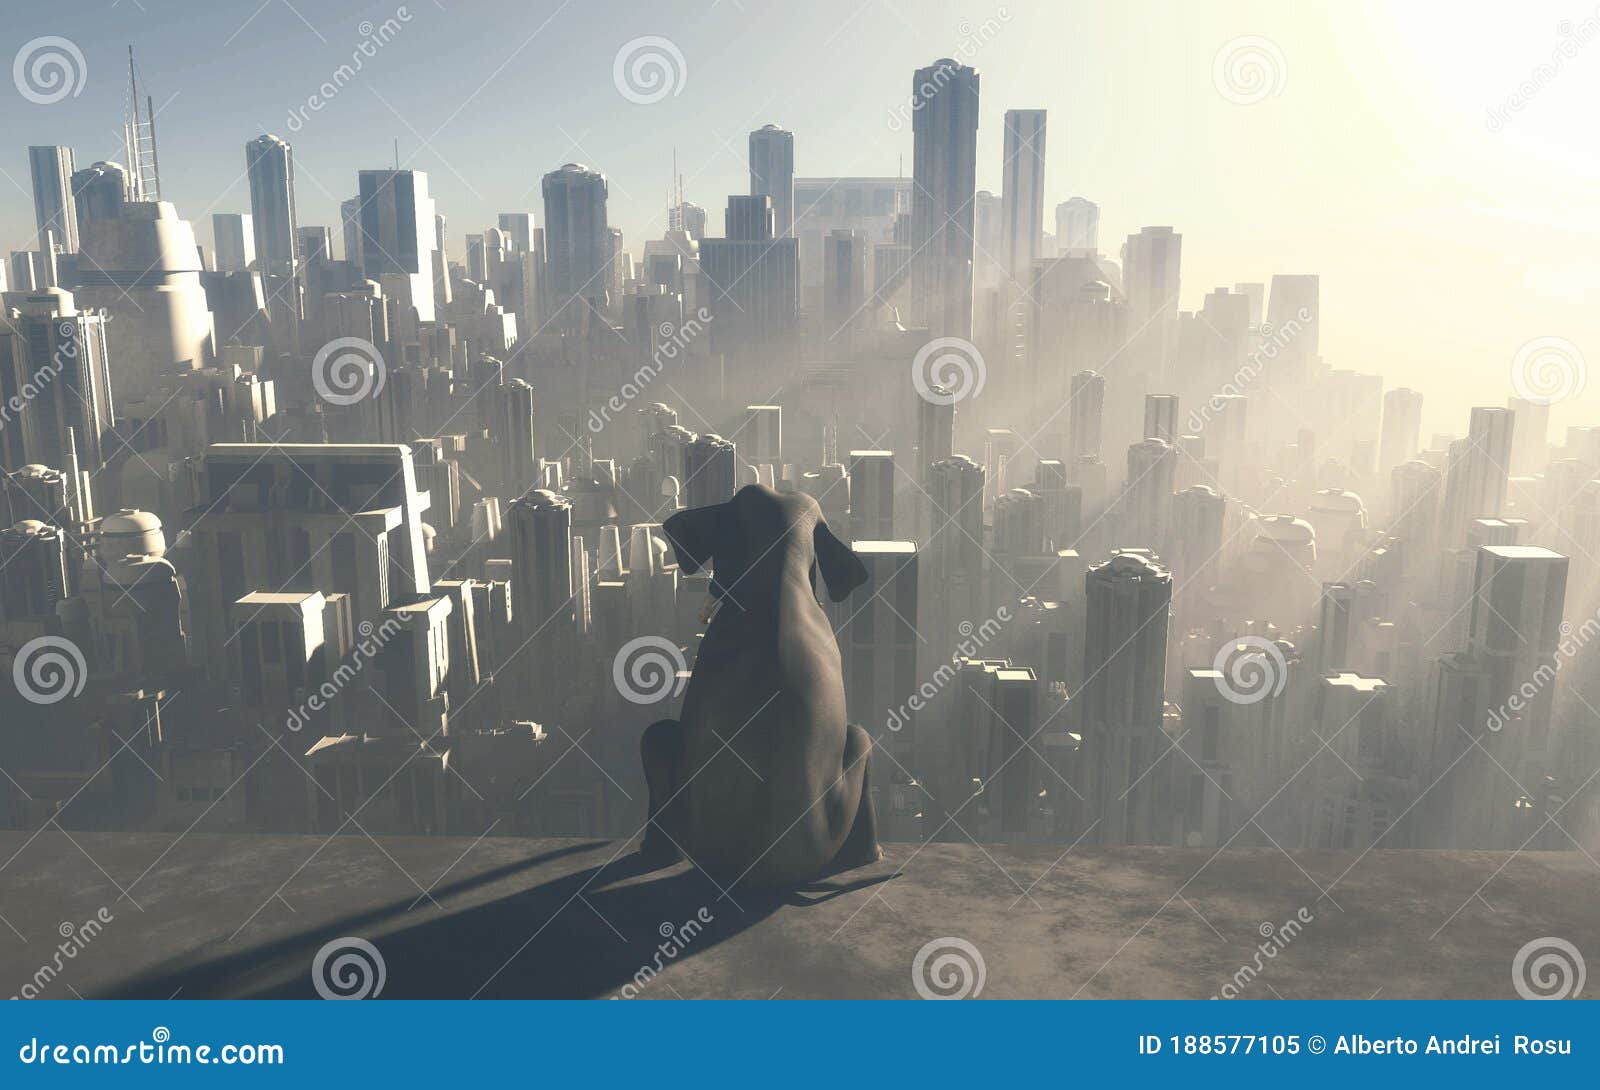 sitting elephant looking at a big city during sunset . industrialization and global warming concept.